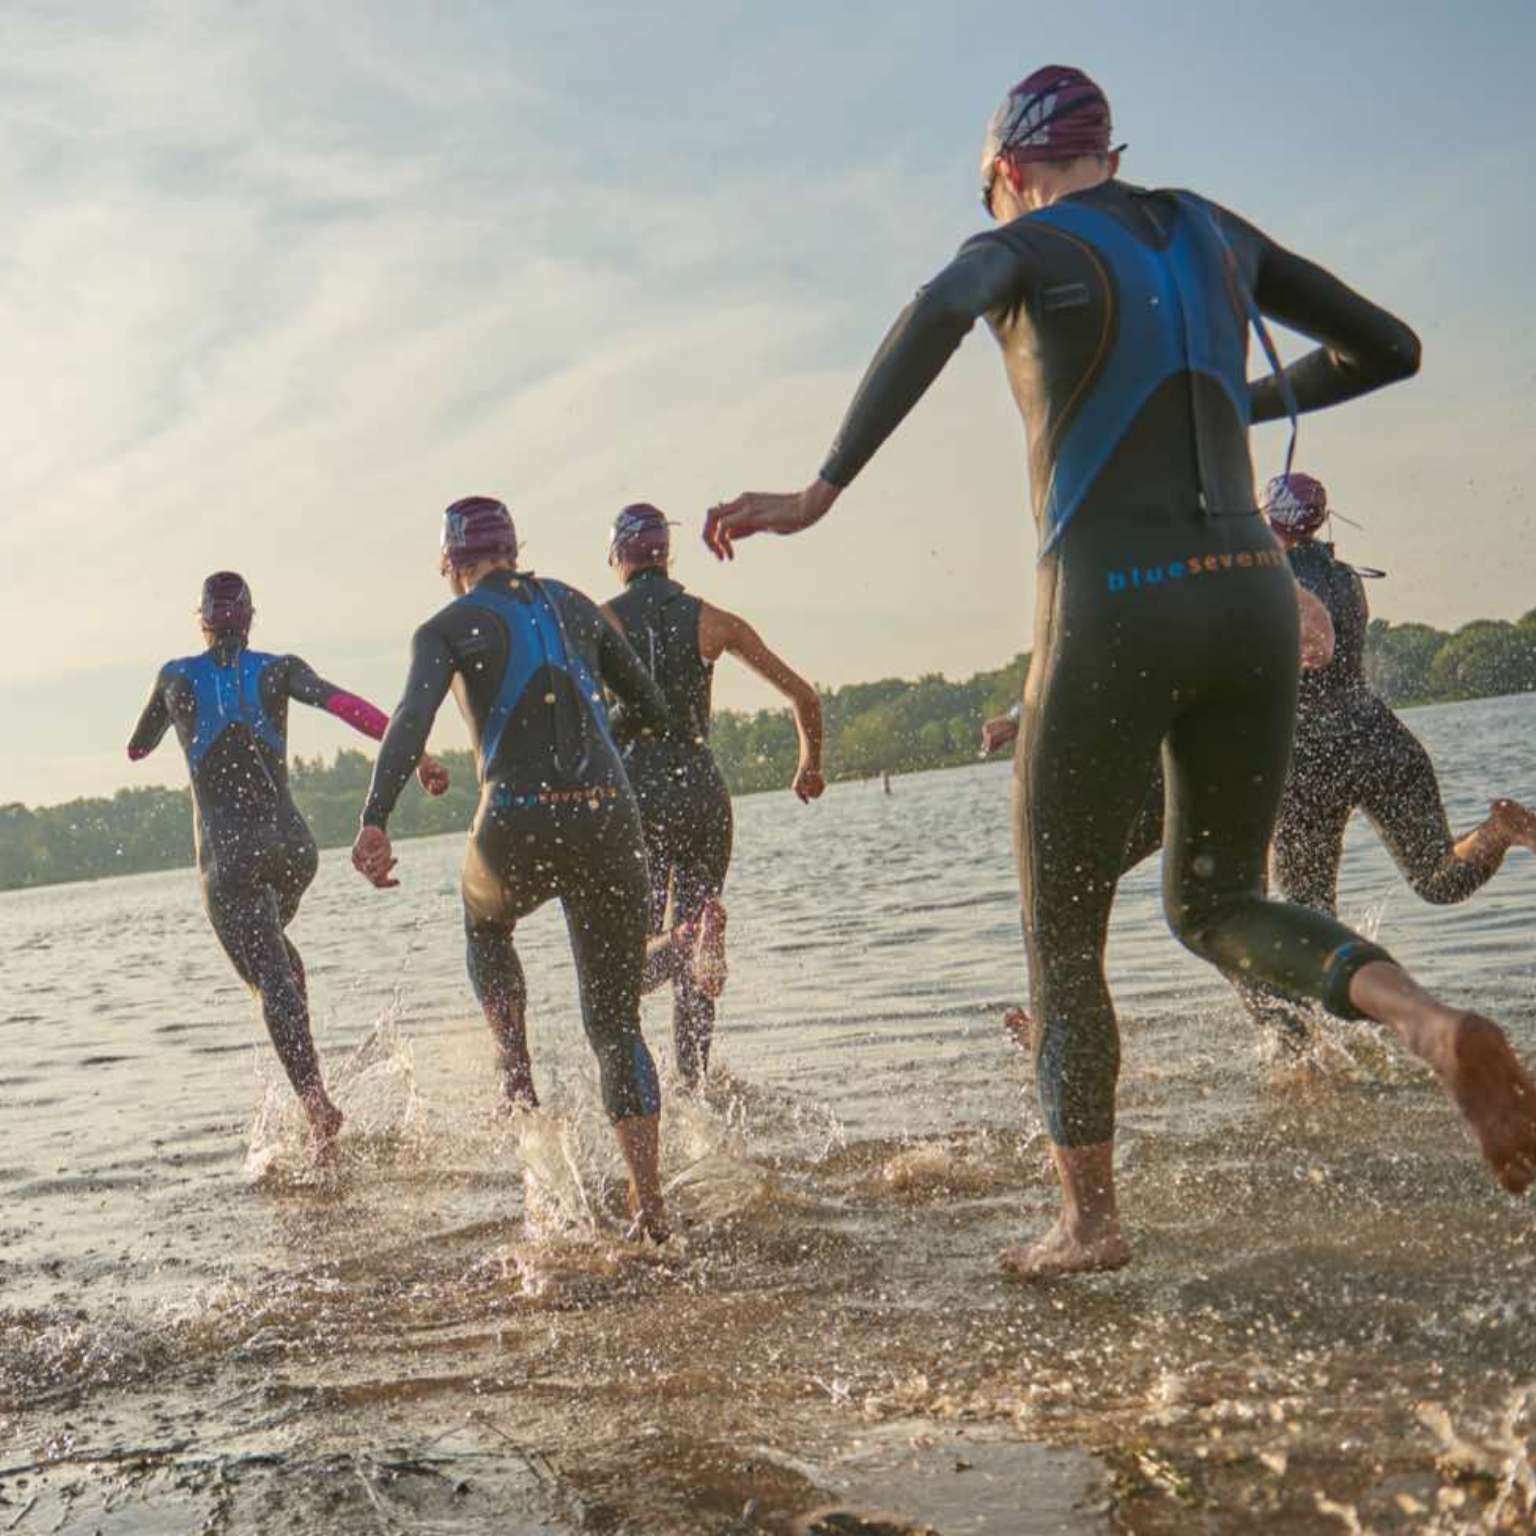 A group of people in wetsuits running into a lake during a triathlon event